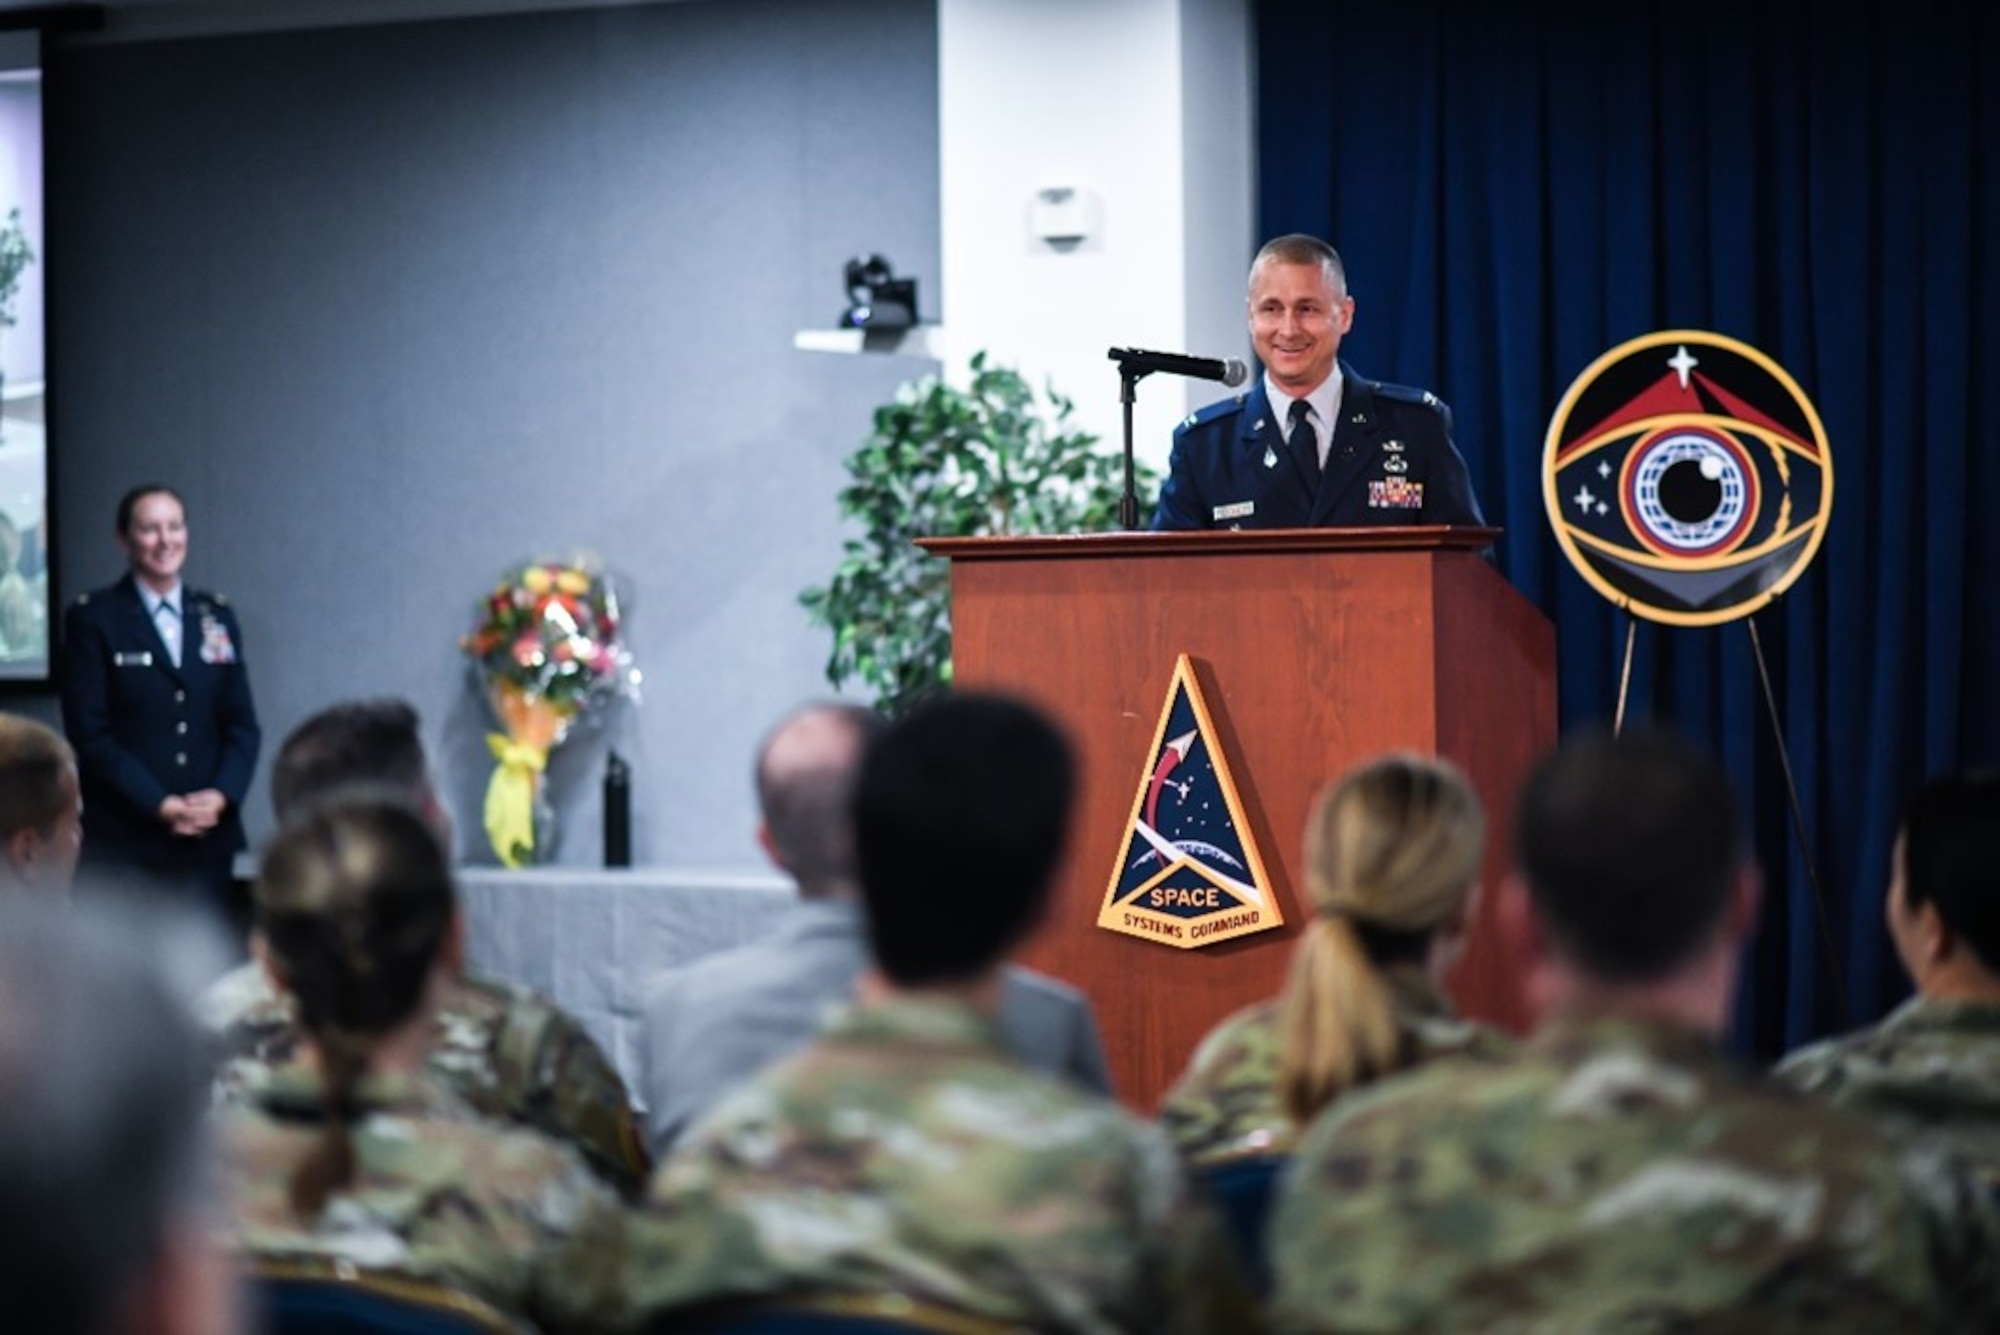 Col. Brian Denaro, outgoing program executive officer of Space Sensing, delivers his final remarks during a change of leadership ceremony at Space System Command headquarters, Los Angeles Air Force Base, California, June 8, 2023. Under Denaro’s tenure, Space Sensing completed SSC’s Space Based Infrared System (SBIRS) constellation with GEO-6, providing persistent missile warning and launch detection crucial to national defense and deterrence.  (U.S. Space Force photo by Van De Ha)